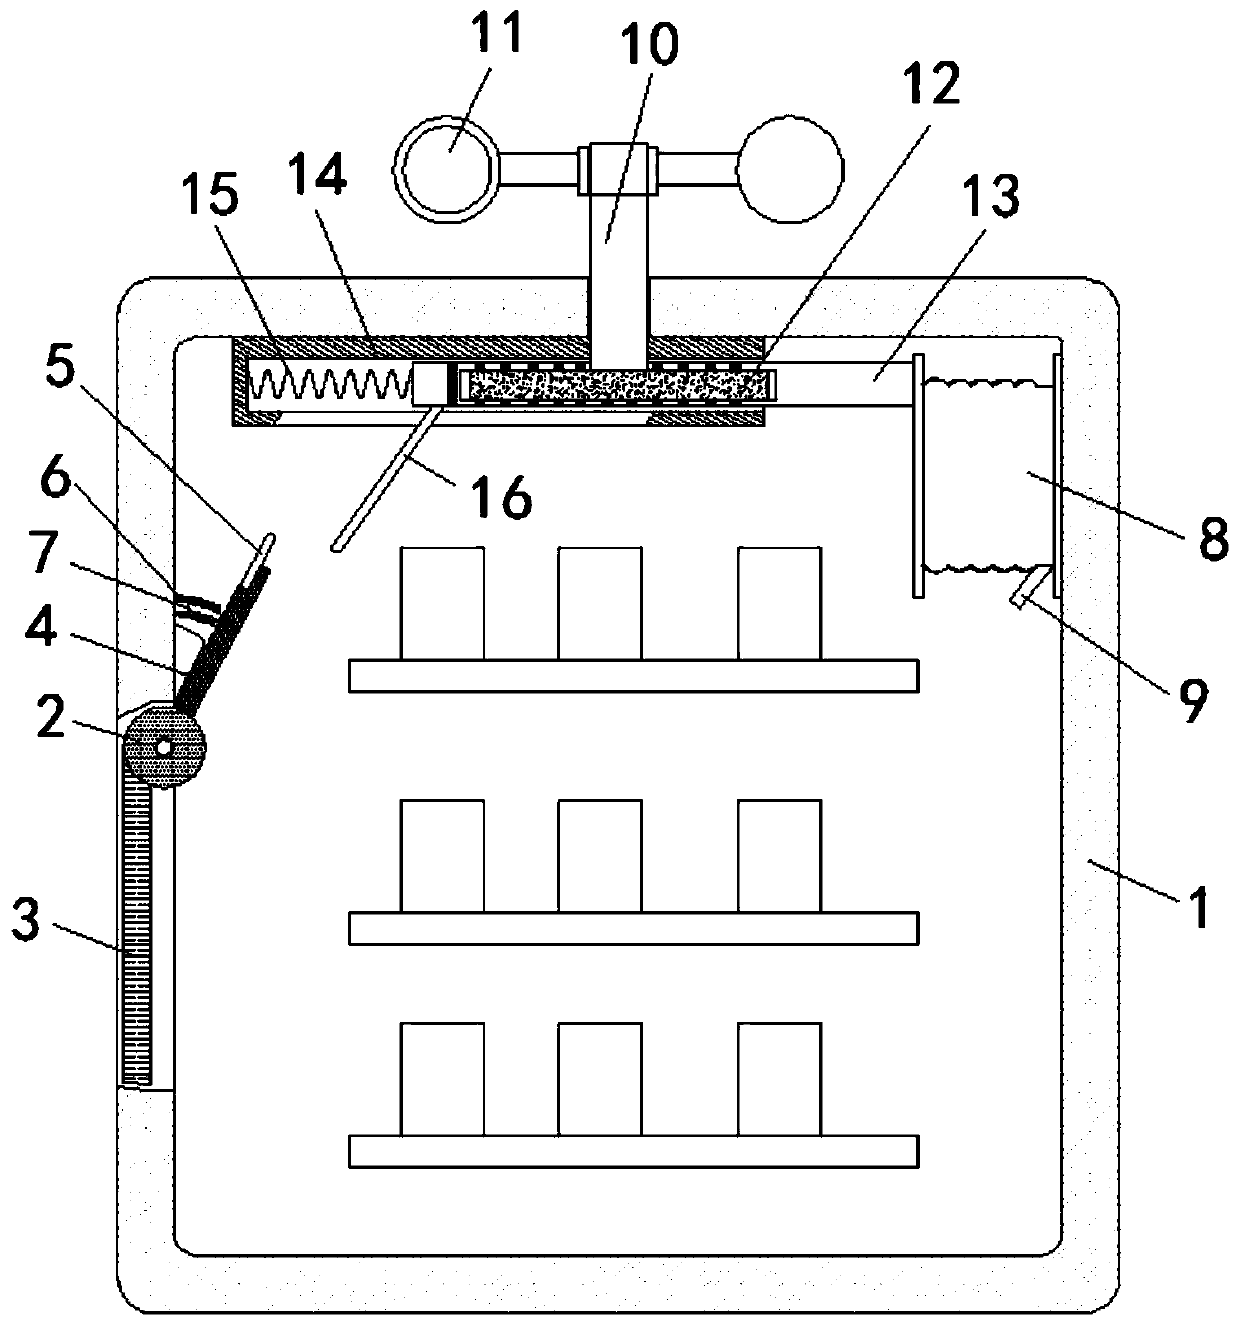 Alternating-current distribution box based on wind power opening and closing heat dissipation